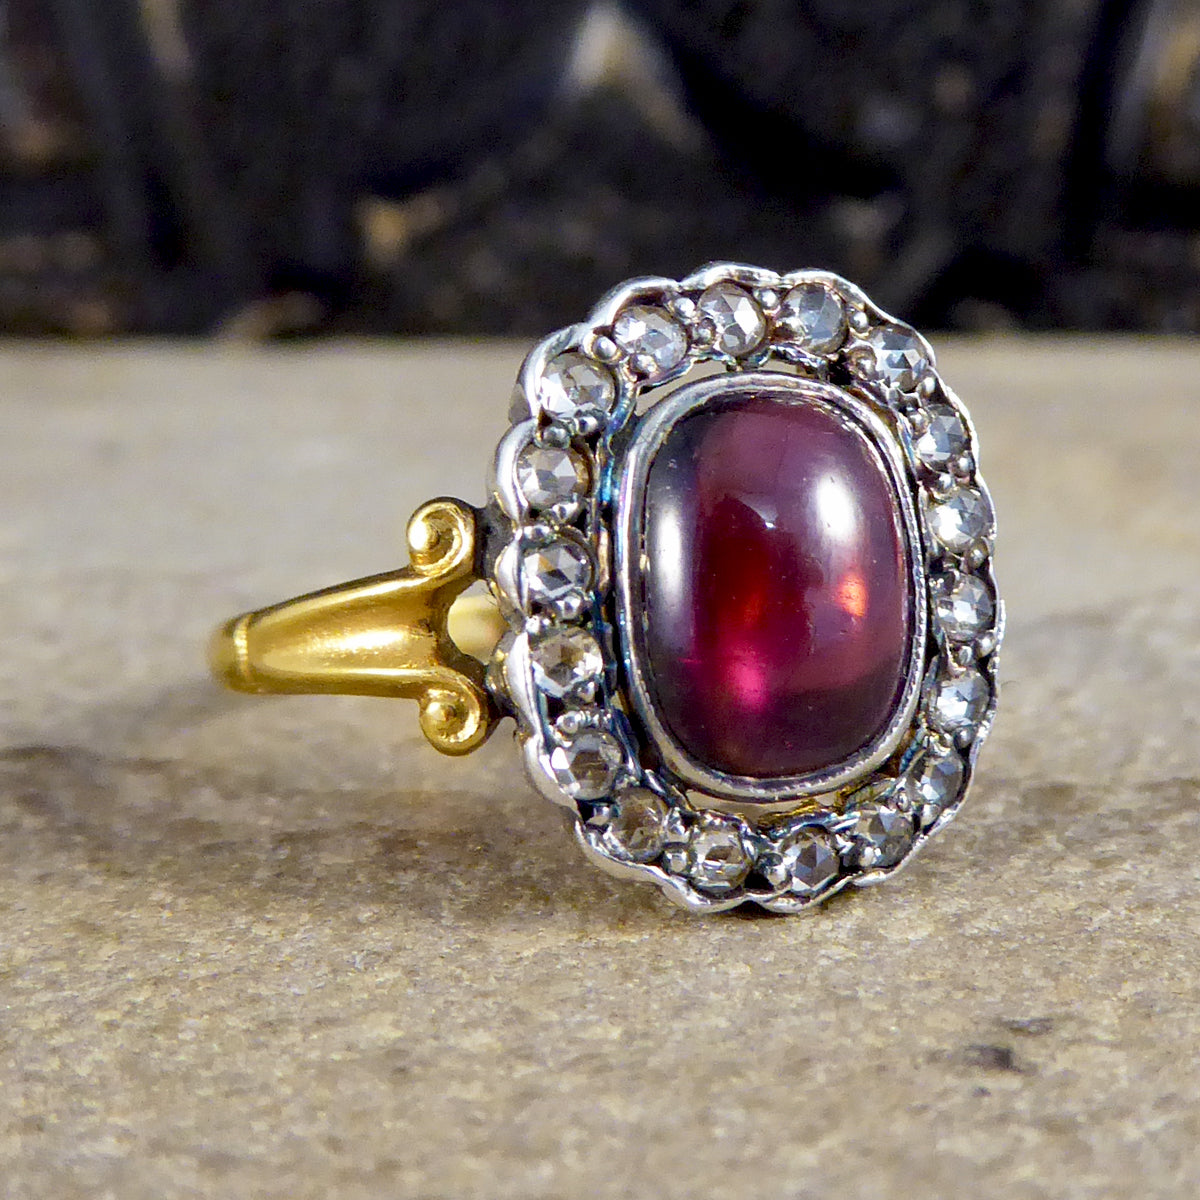 Antique Style Cabochon Garnet and Diamond Cluster Ring in 18ct Yellow Gold